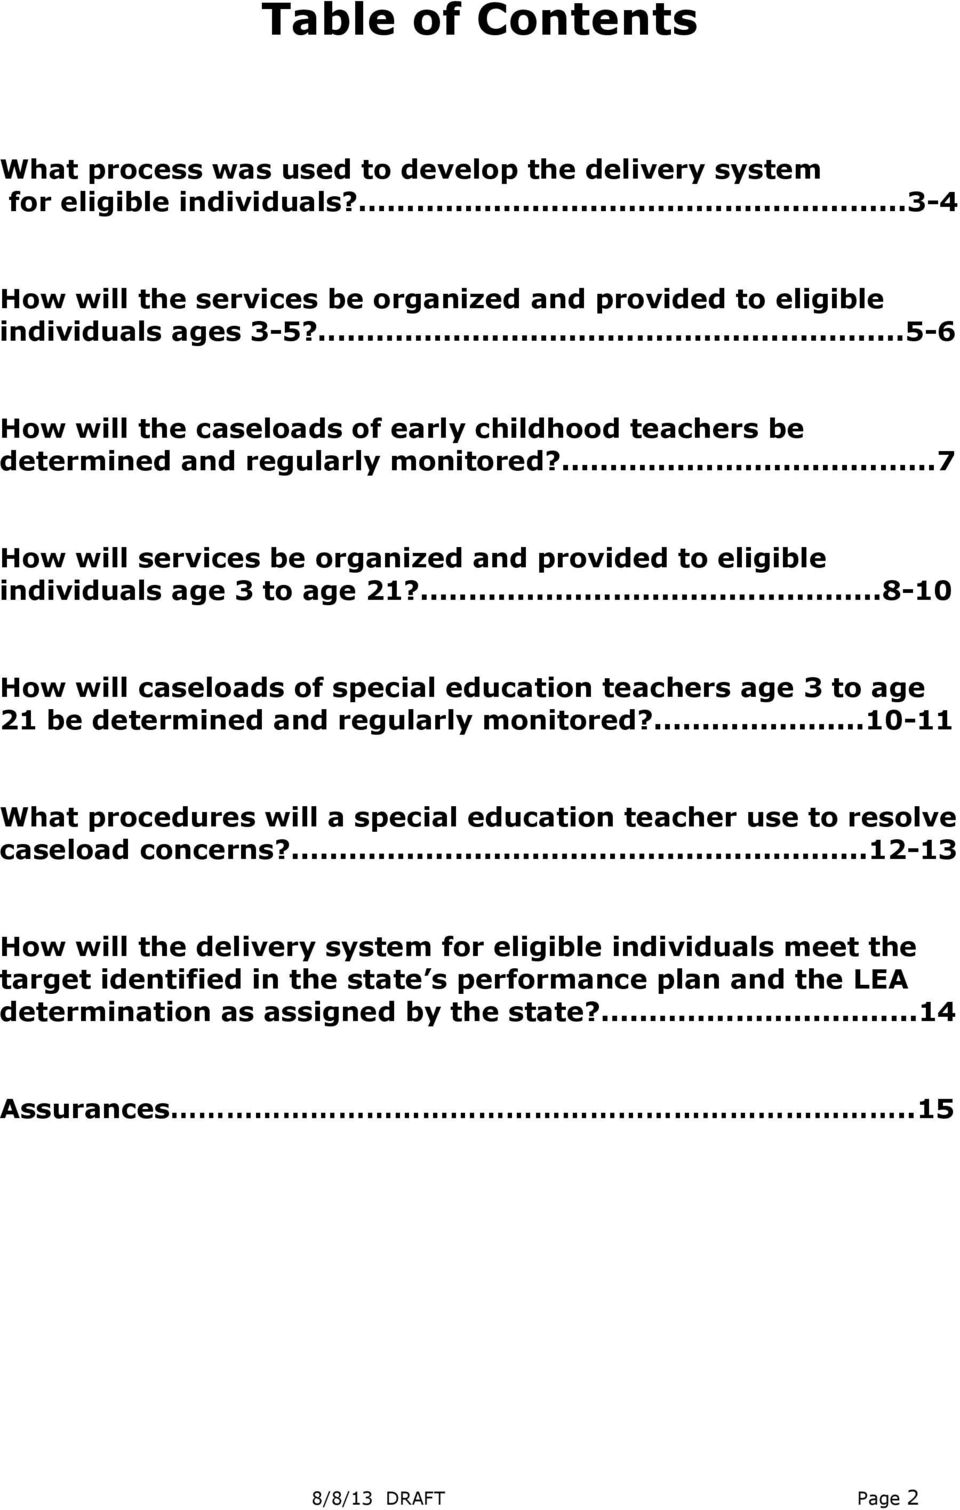 ...8-10 How will caseloads of special education teachers age 3 to age 21 be determined and regularly monitored?